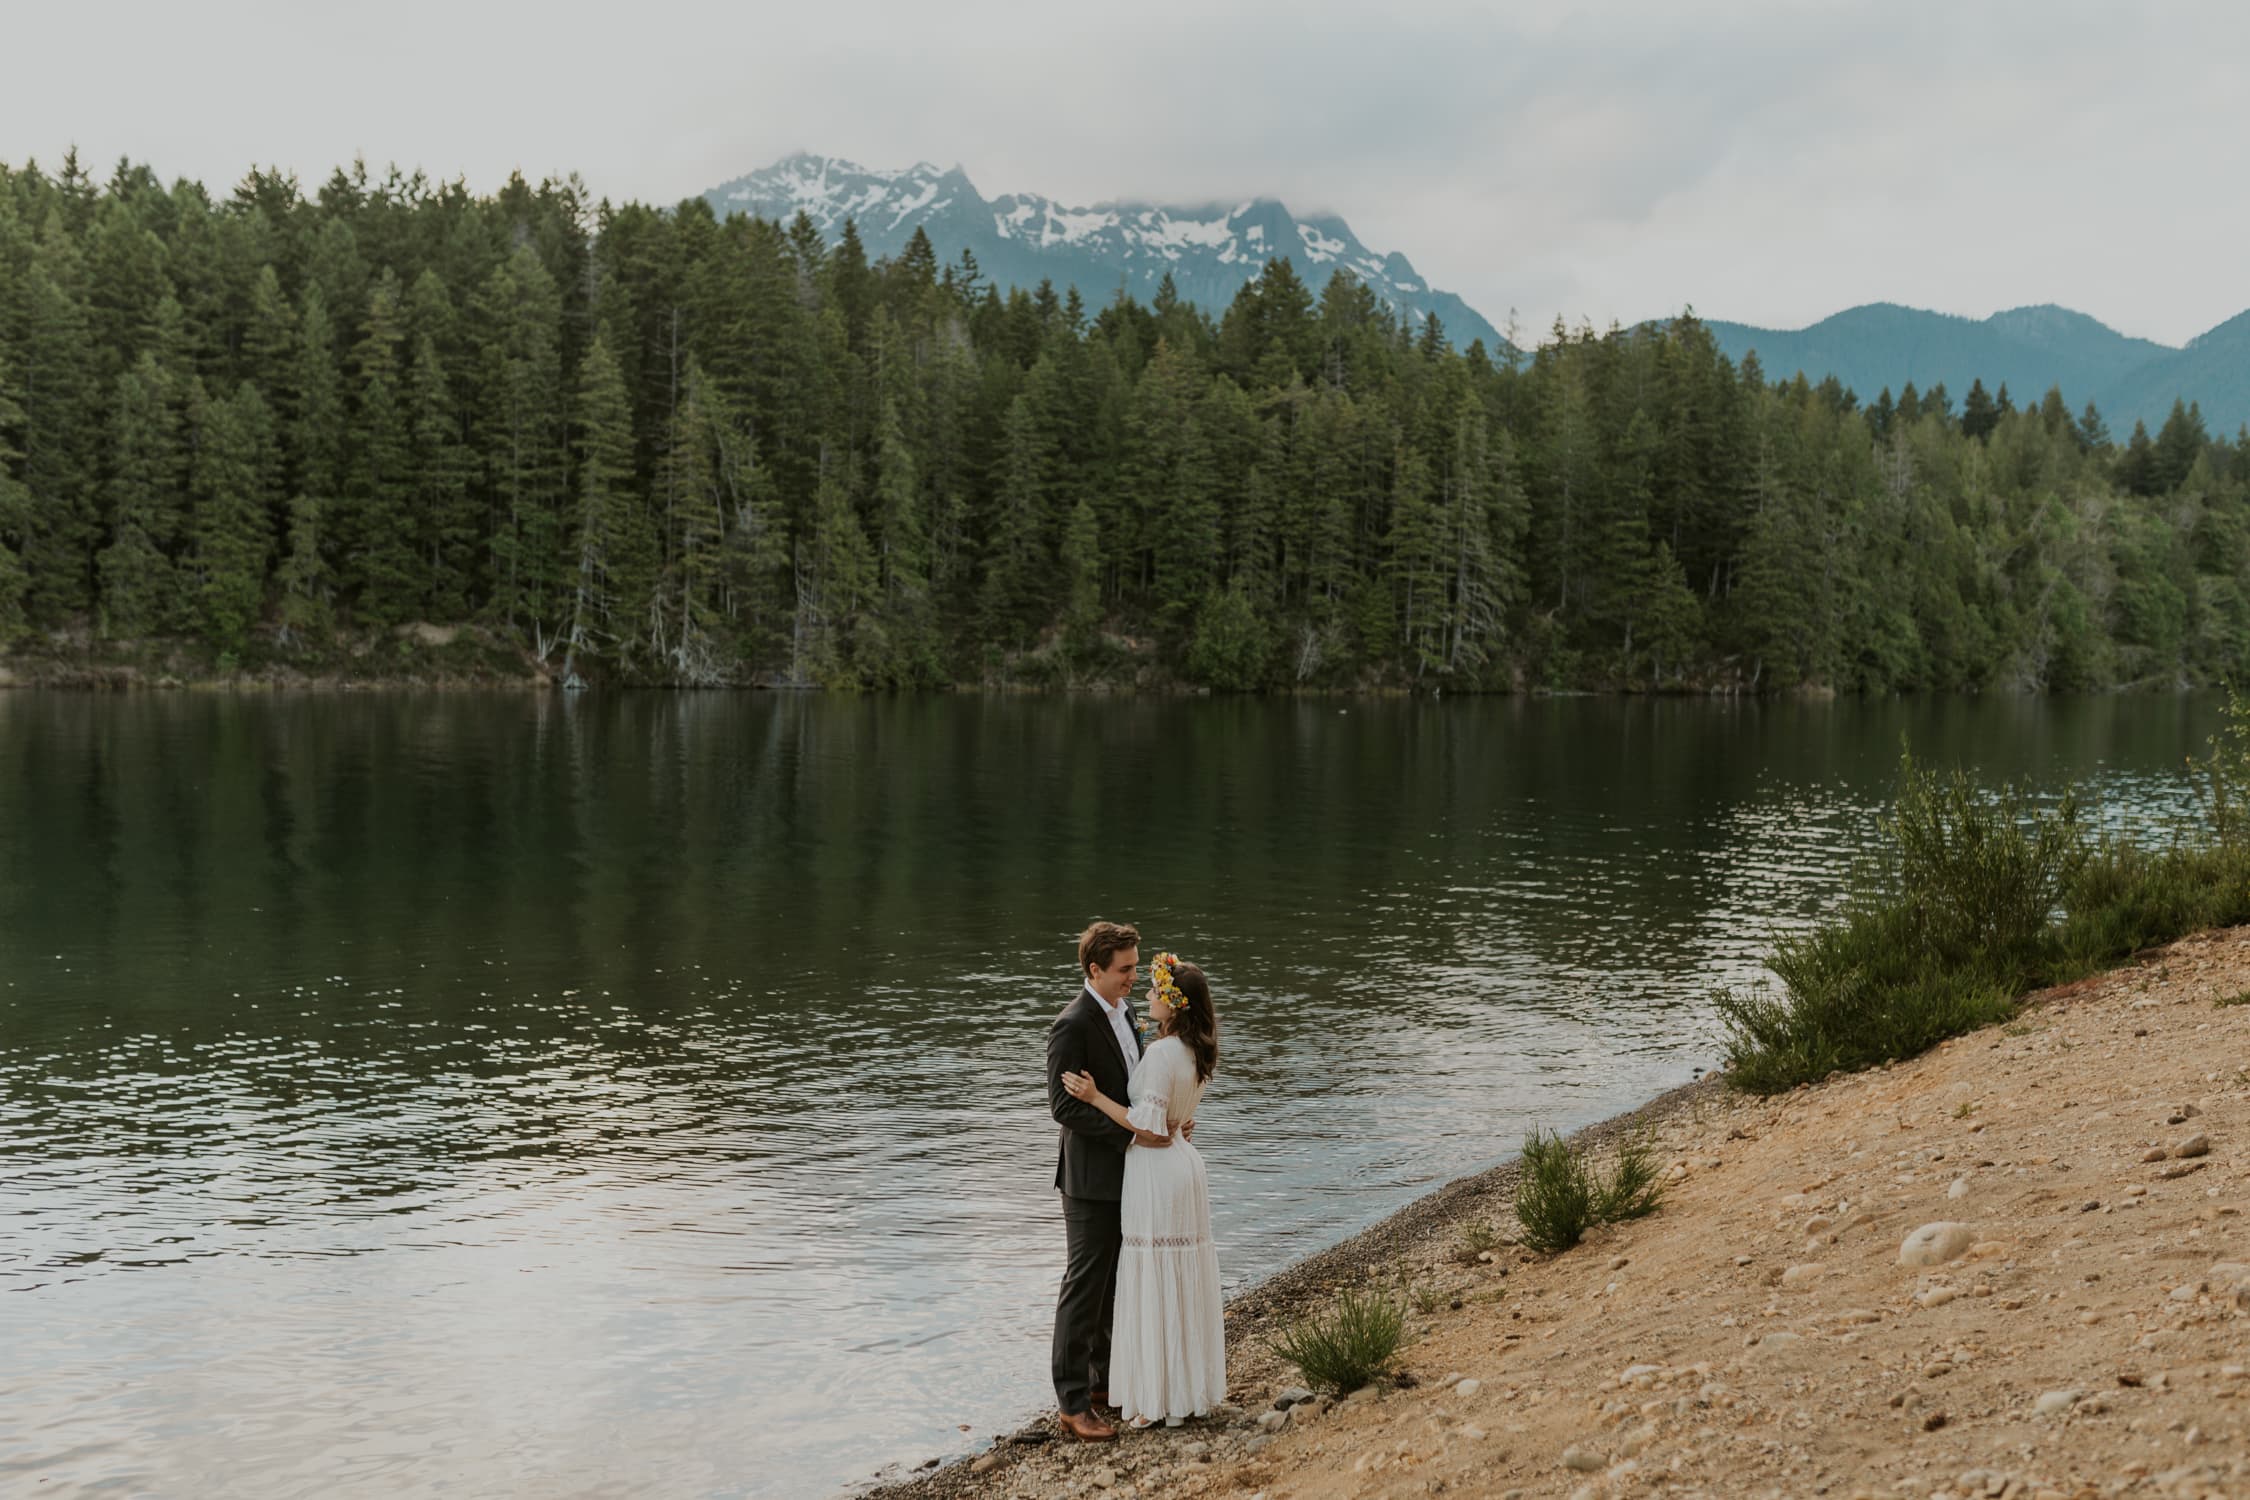 A bride and groom facing each other at Lake Cushman during their elopement.